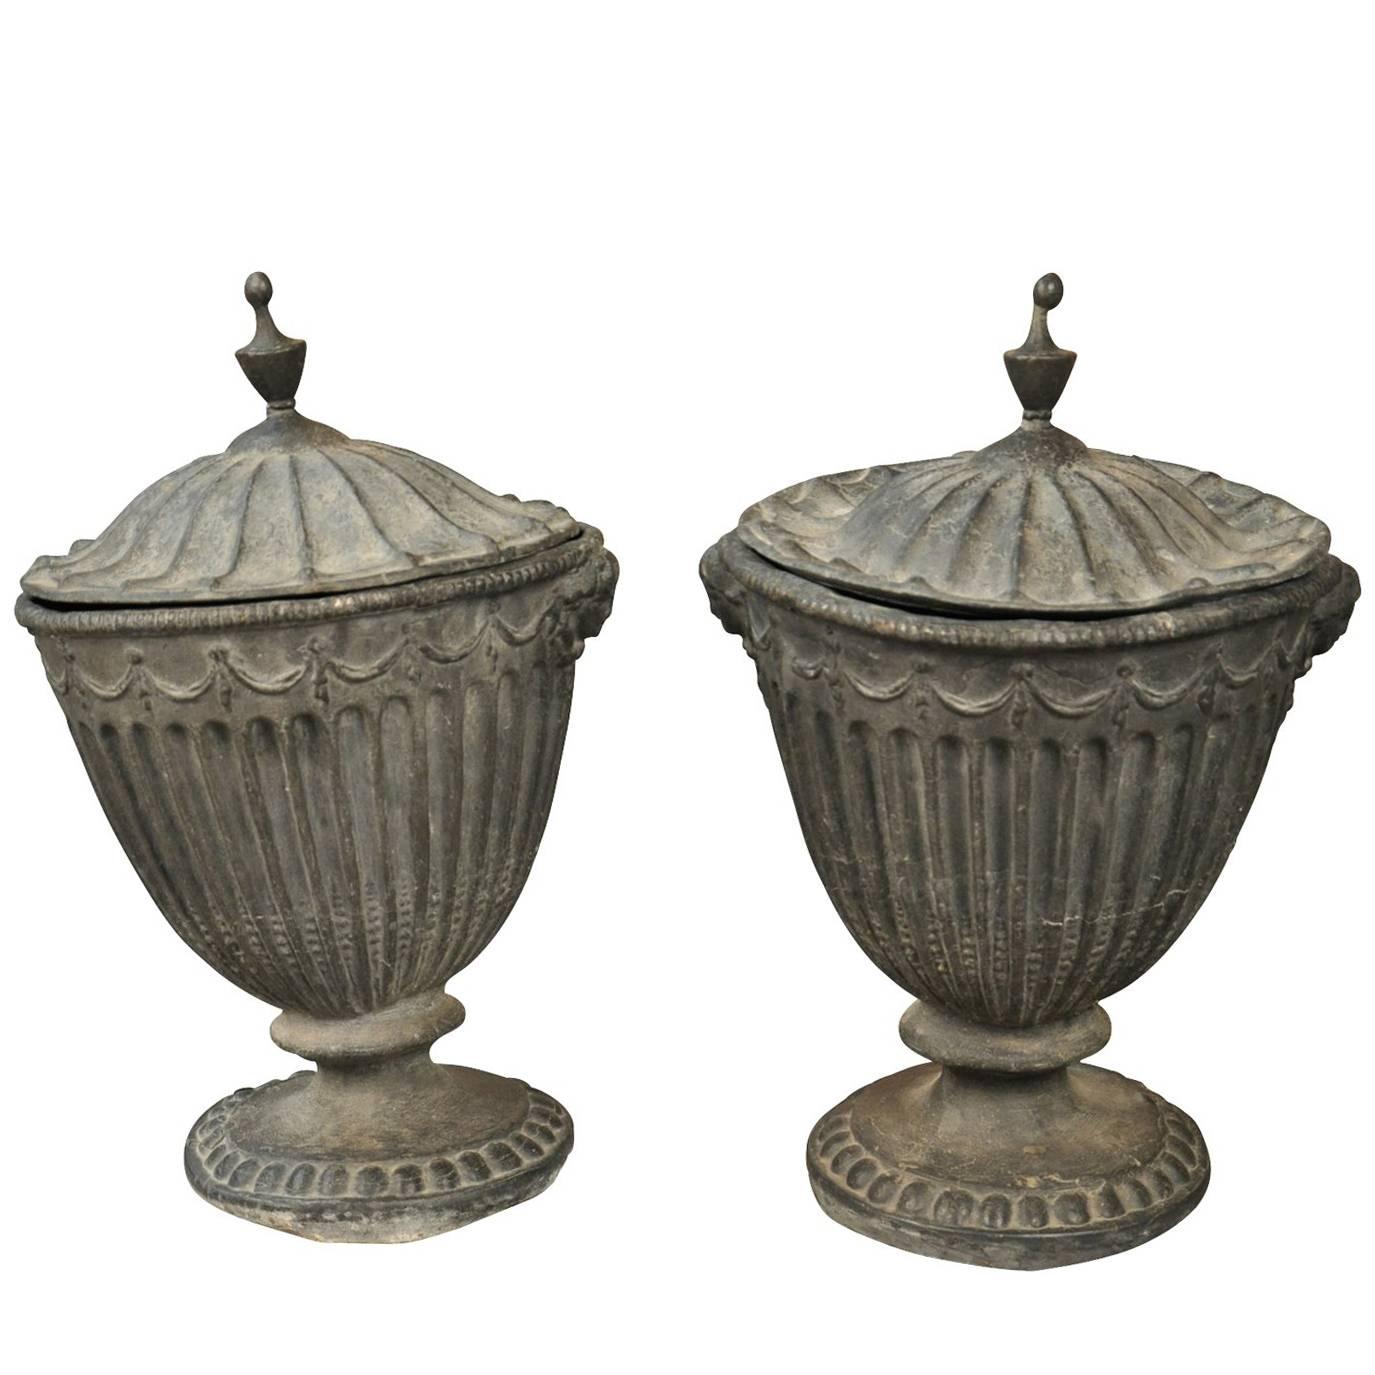 Stunning Pair of 18th Century English Lidded Urns in Lead